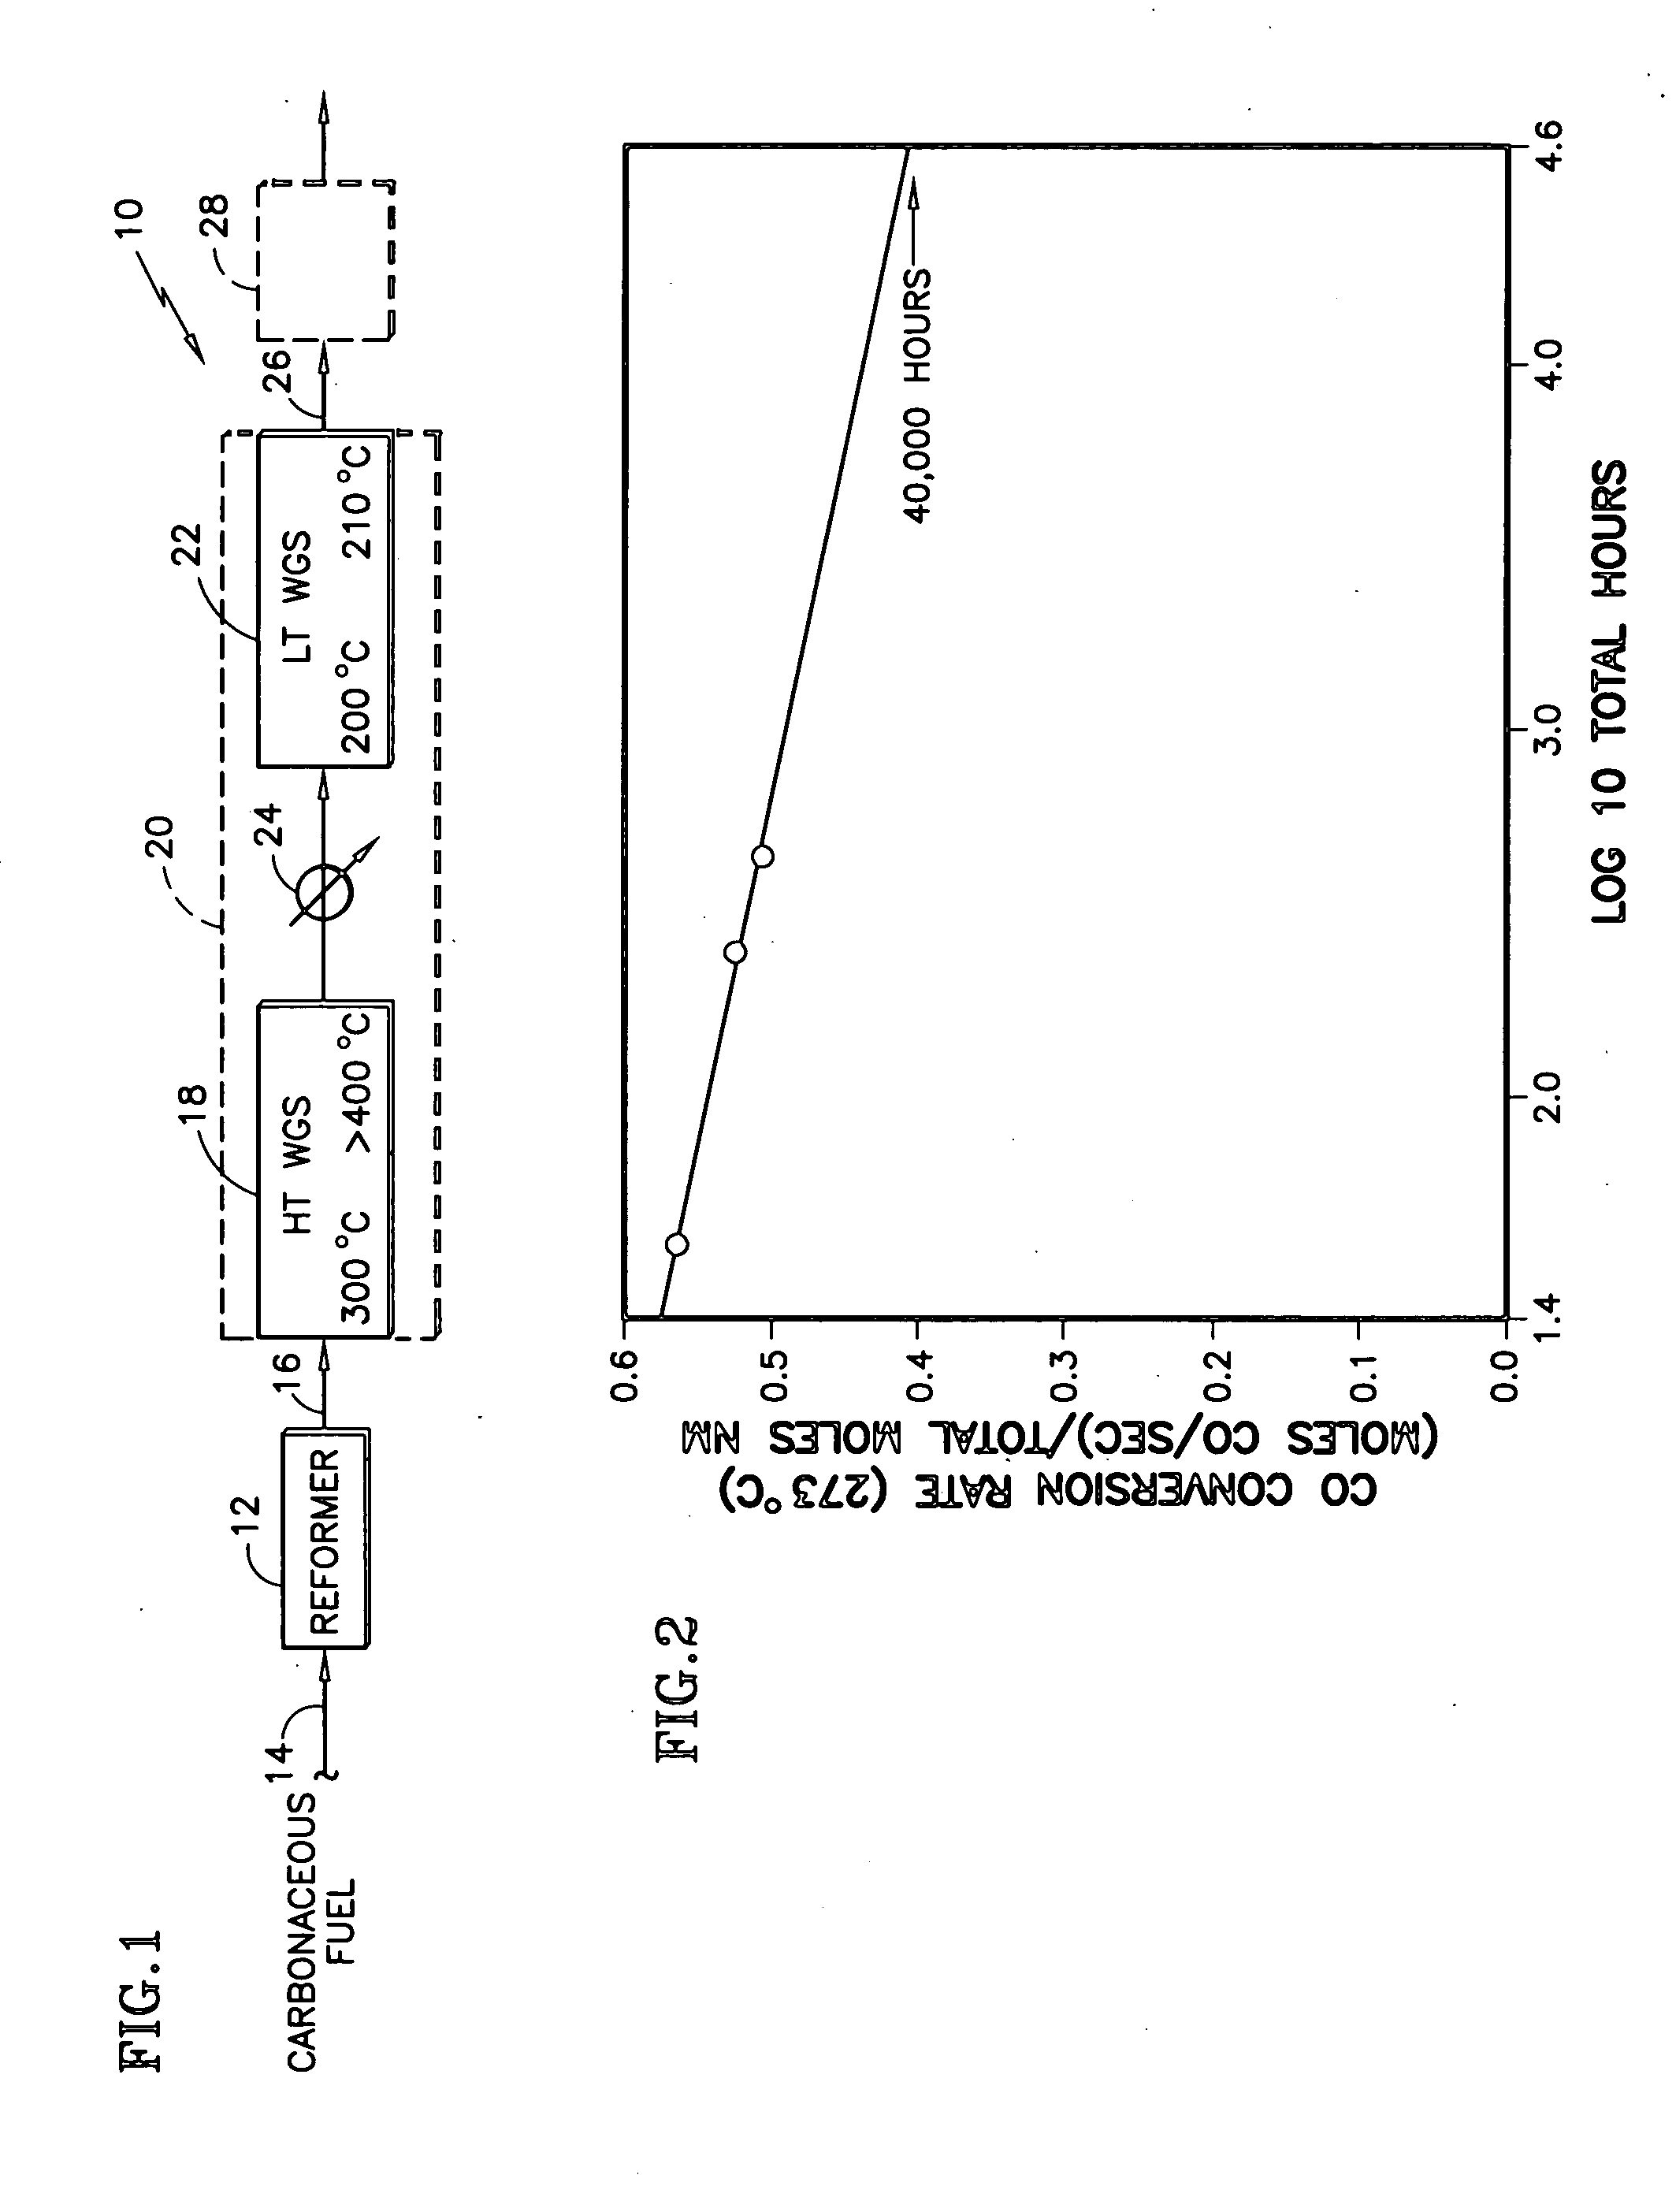 Durable catalyst for processing carbonaceous fuel, and the method of making